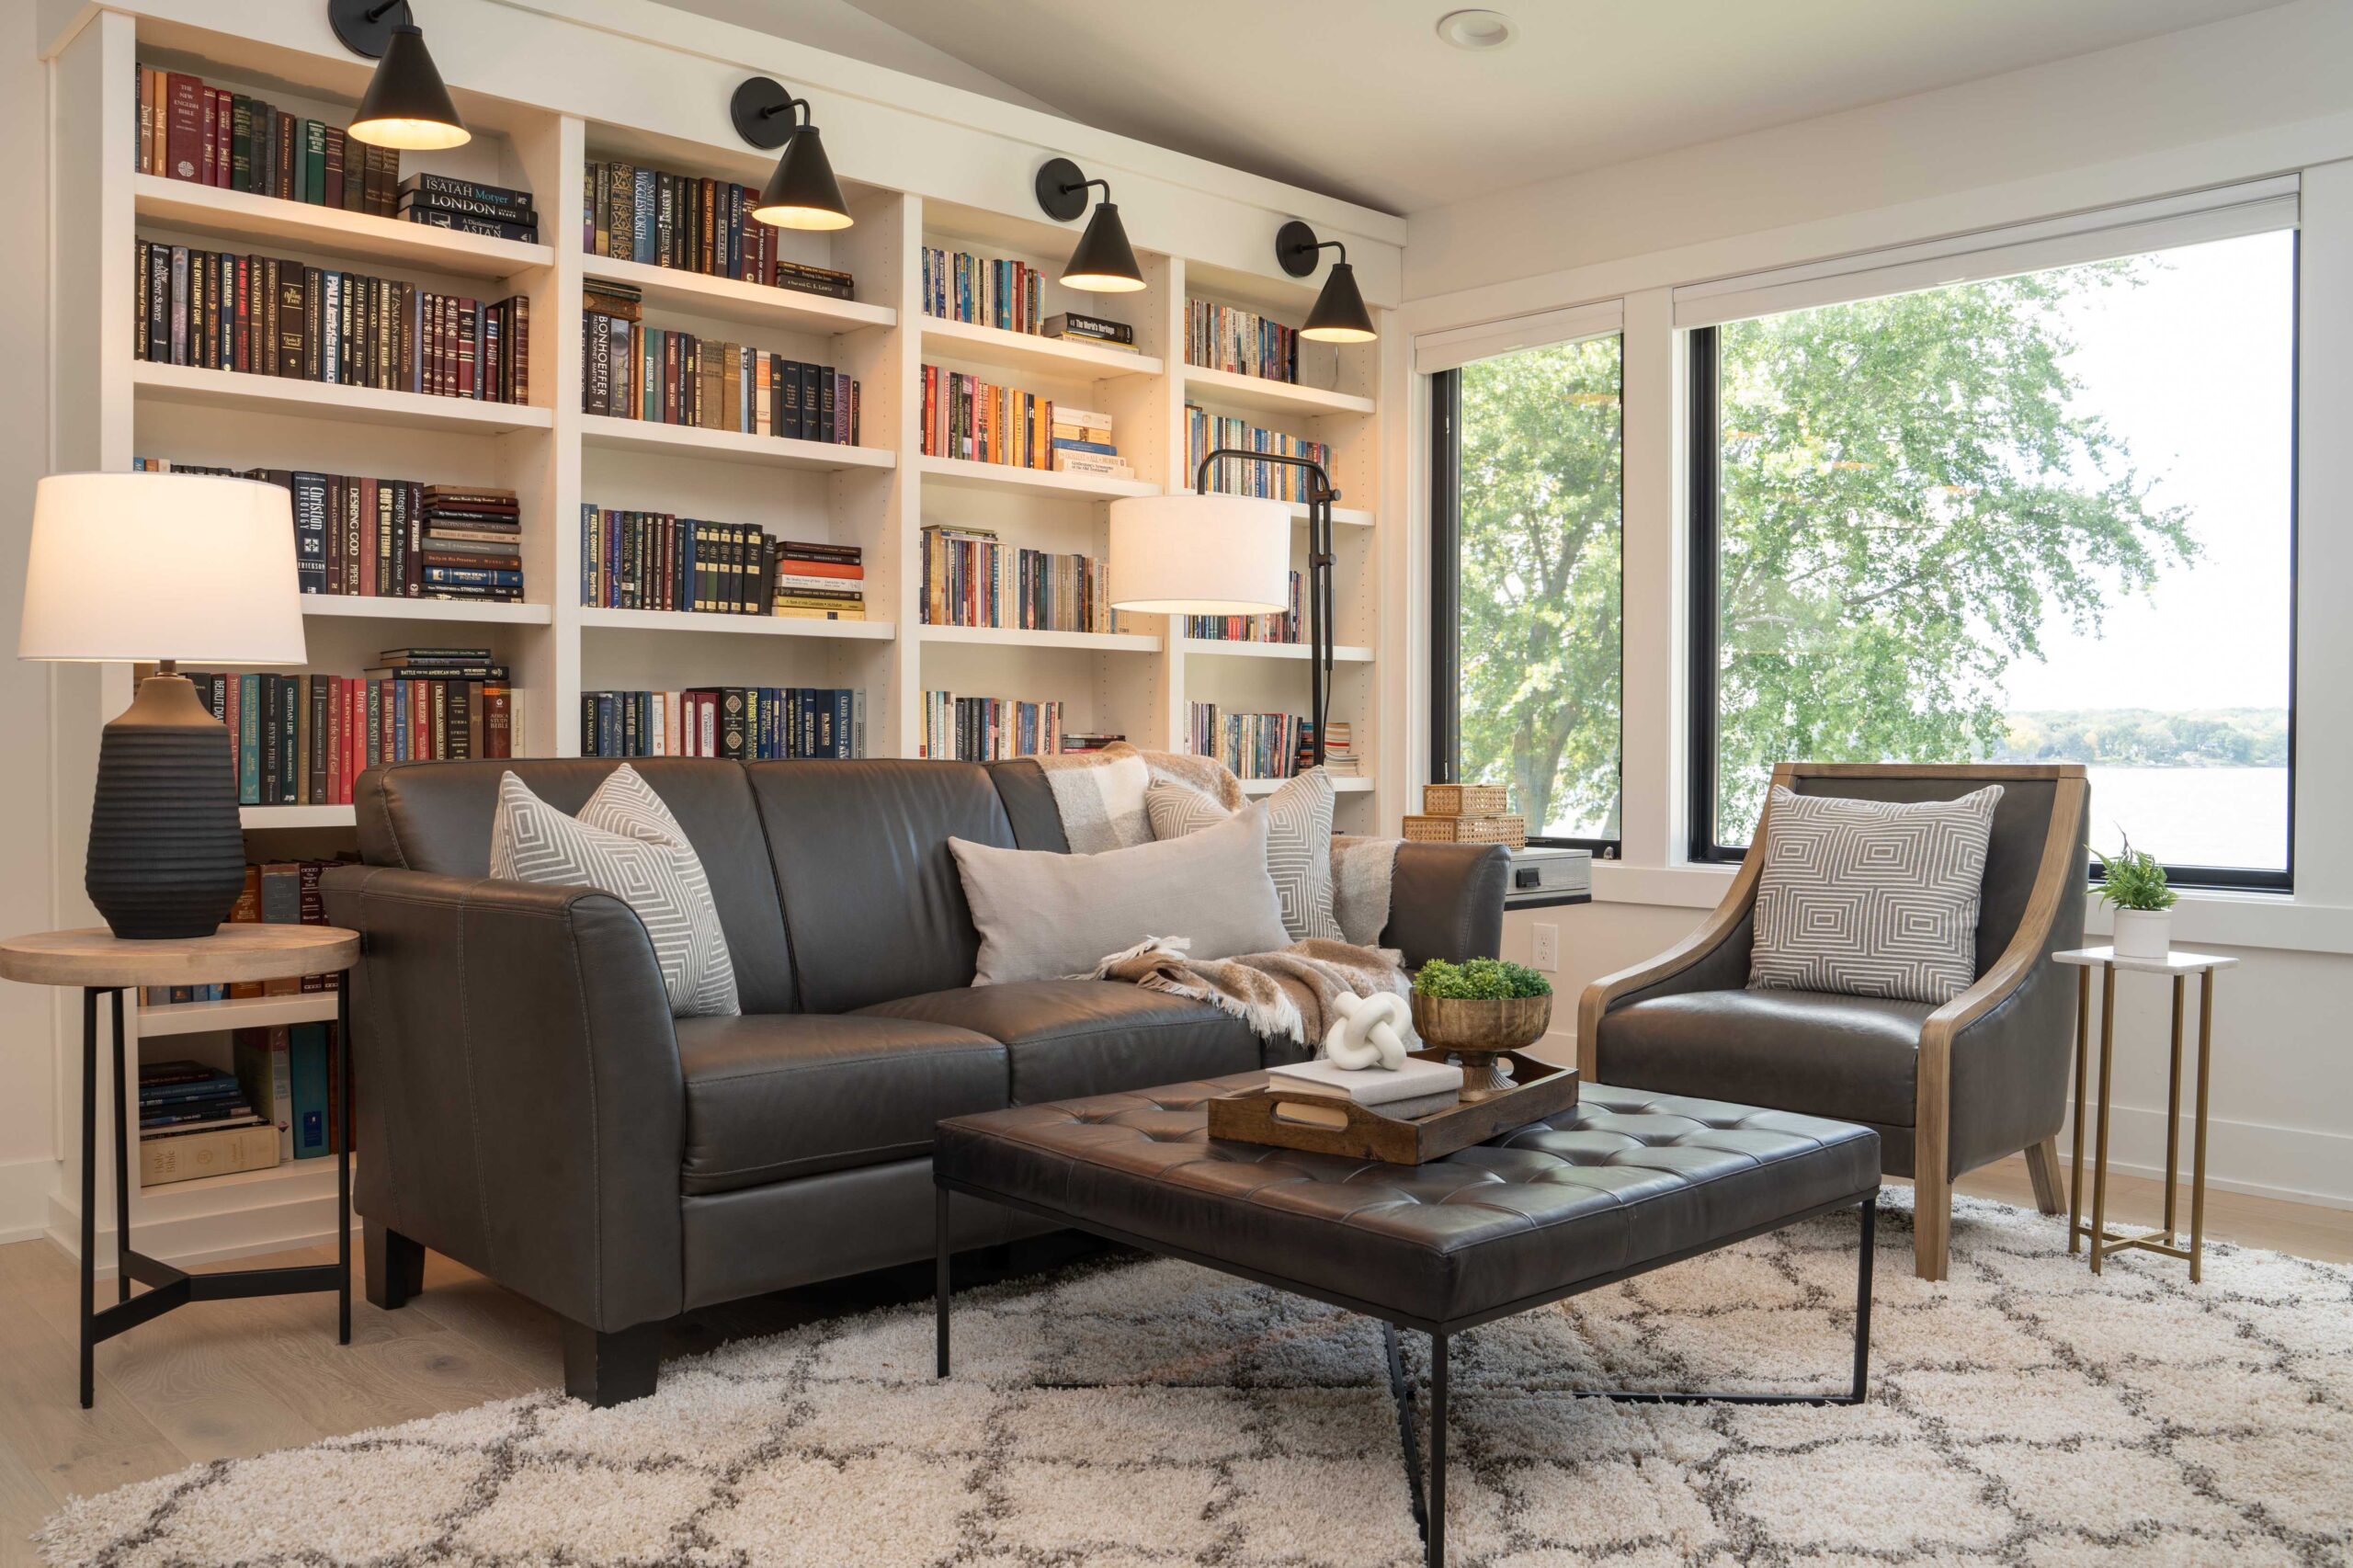 An Orchard Lake Remodel living room with a couch, coffee table and bookshelves.